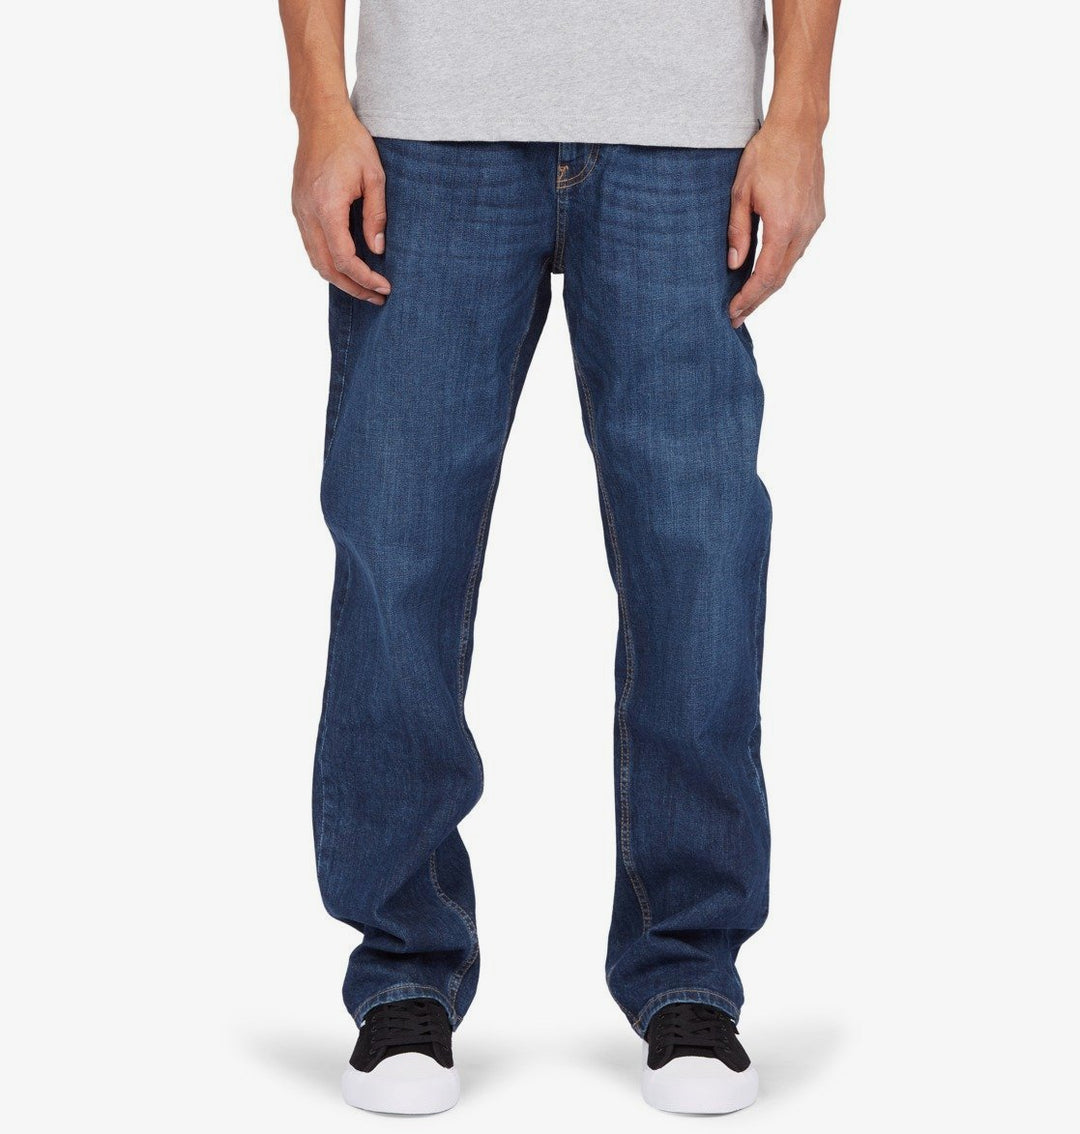 Dc shoes Worker Straight Jeans